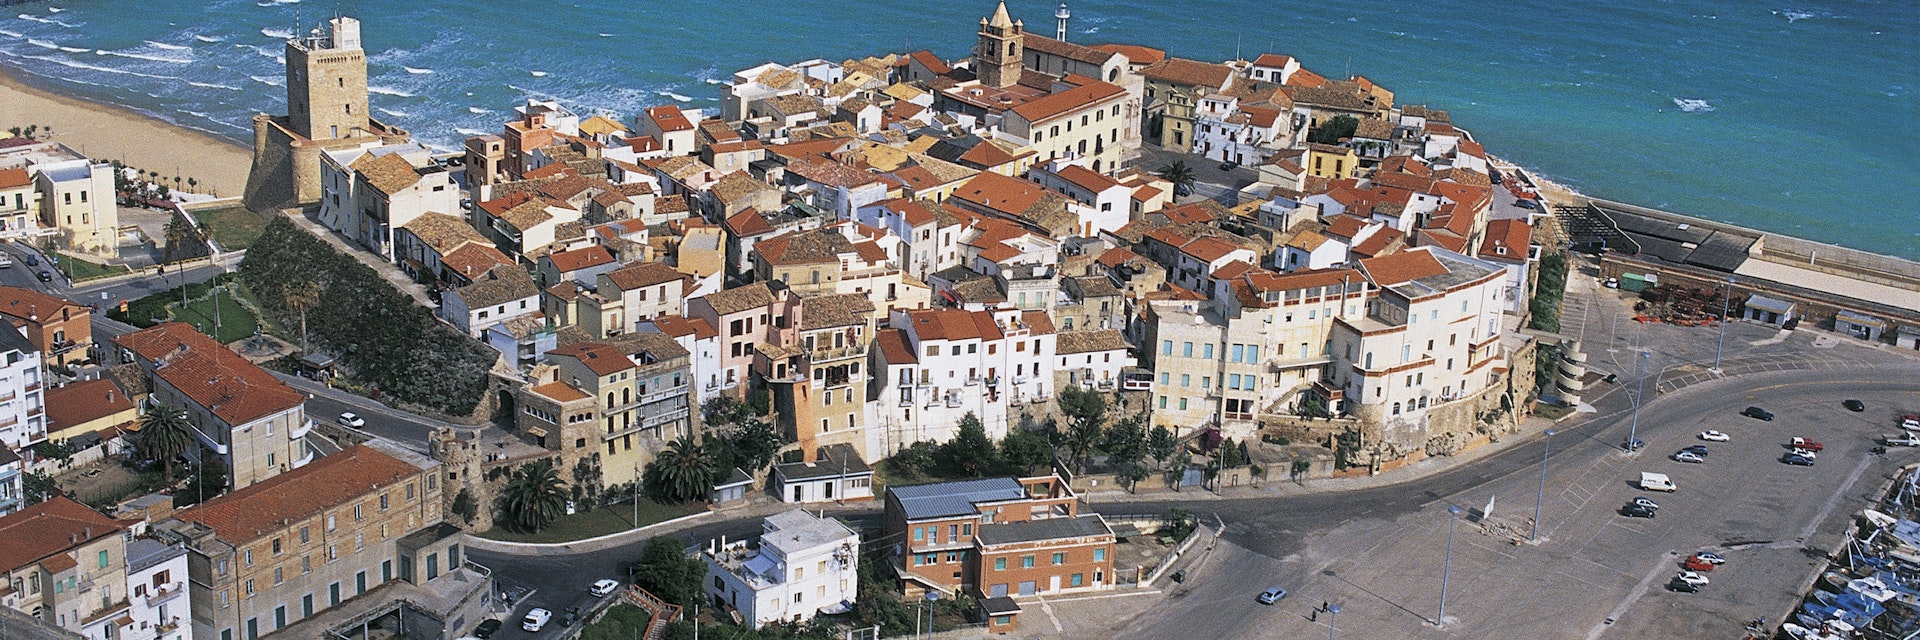 Aerial view of a town, Termoli, Molise, Italy